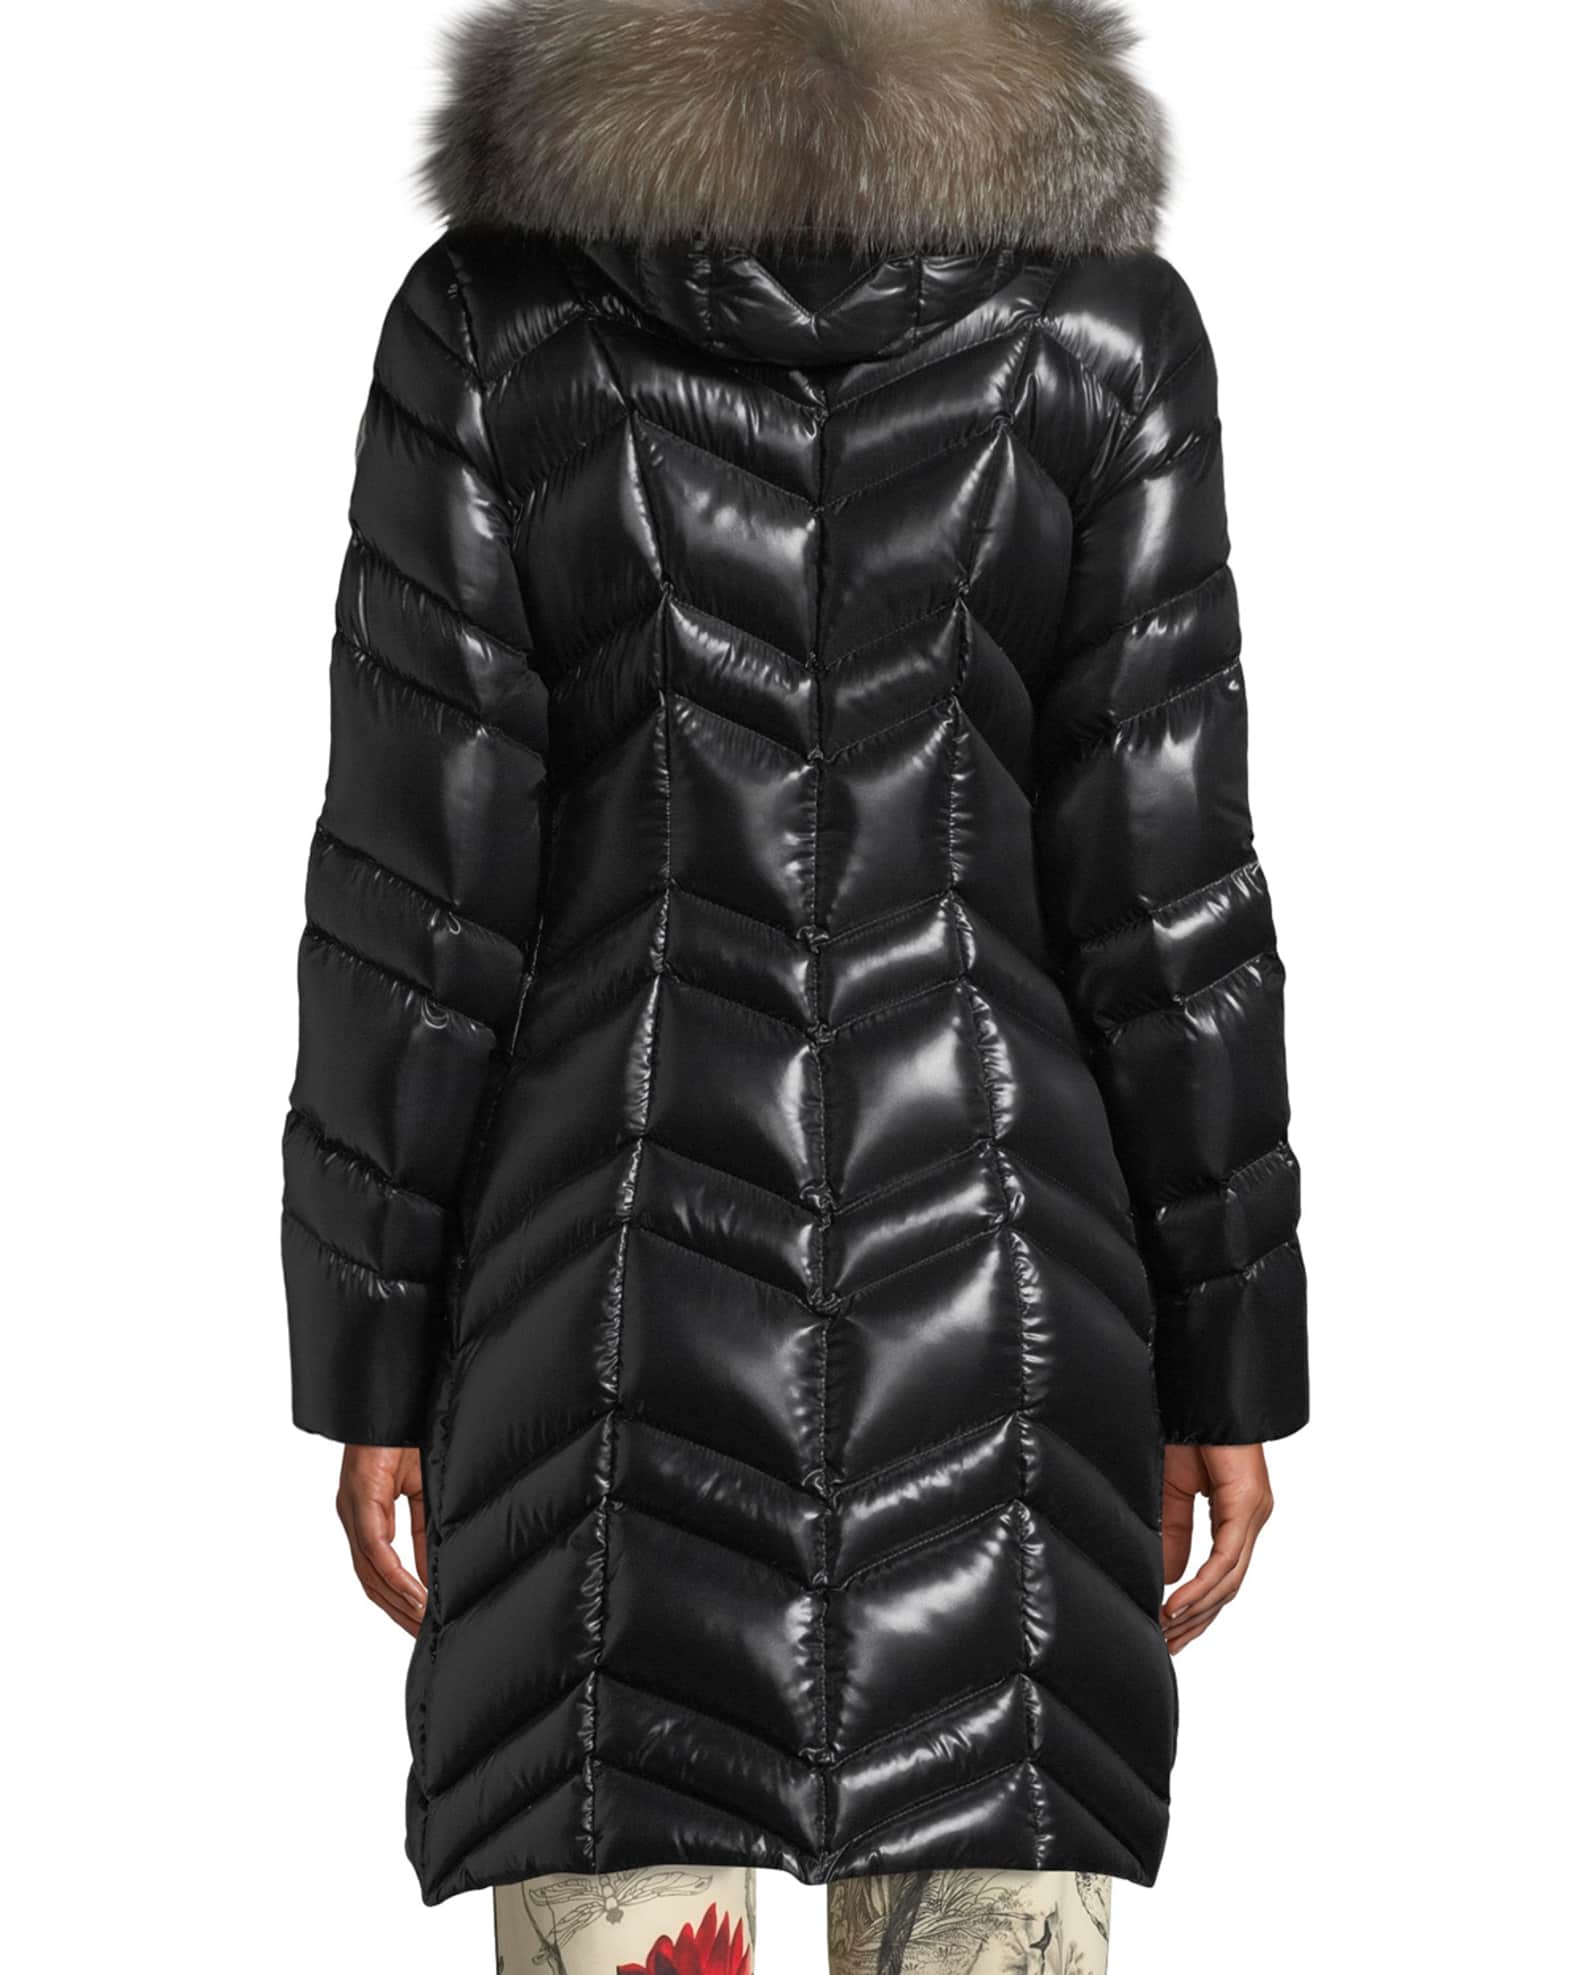 Fulmar Hooded Puffer Coat w/ Removable Fur Trim and Matching Items ...